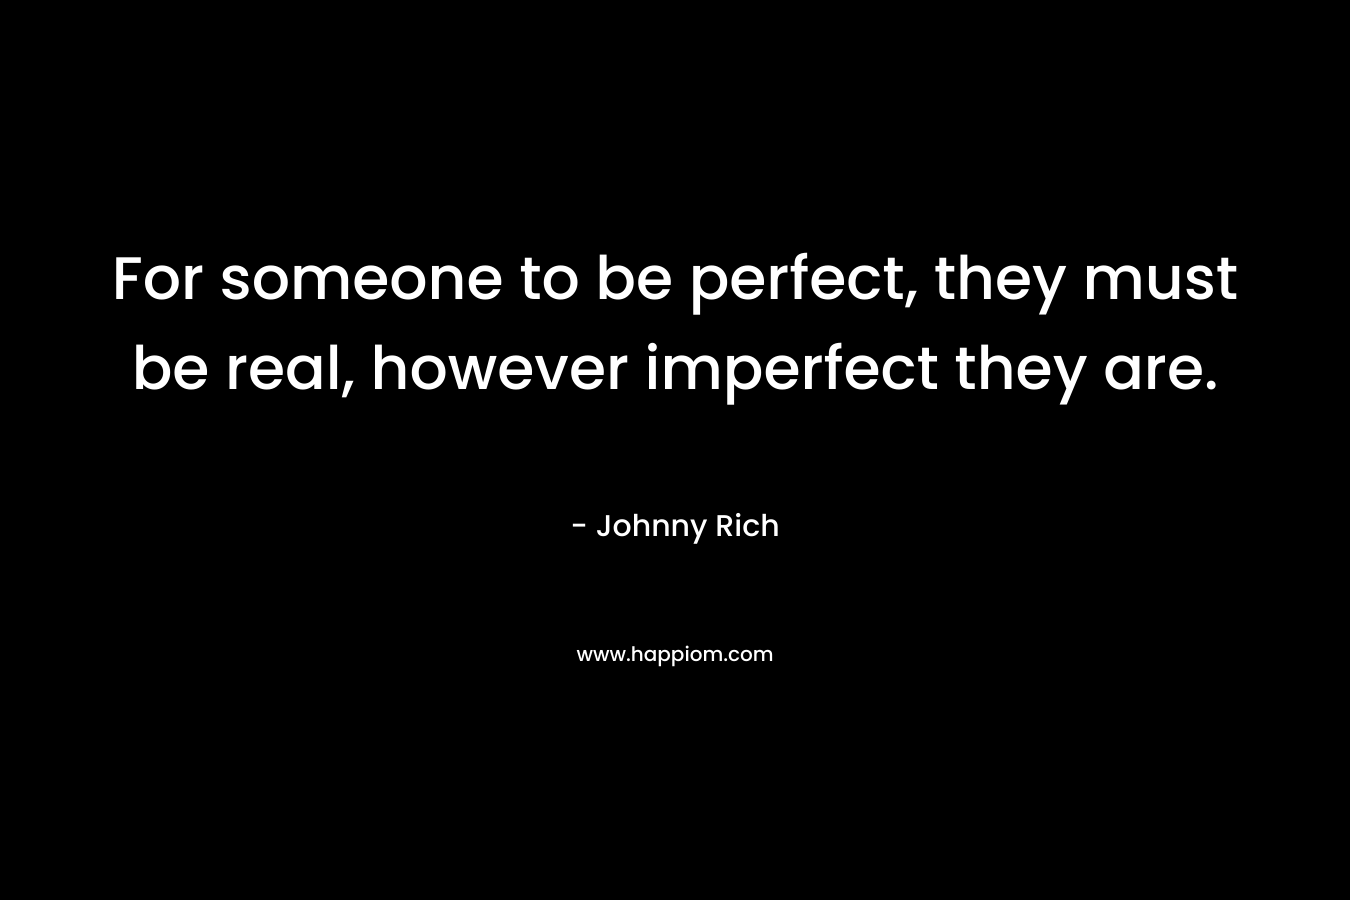 For someone to be perfect, they must be real, however imperfect they are.